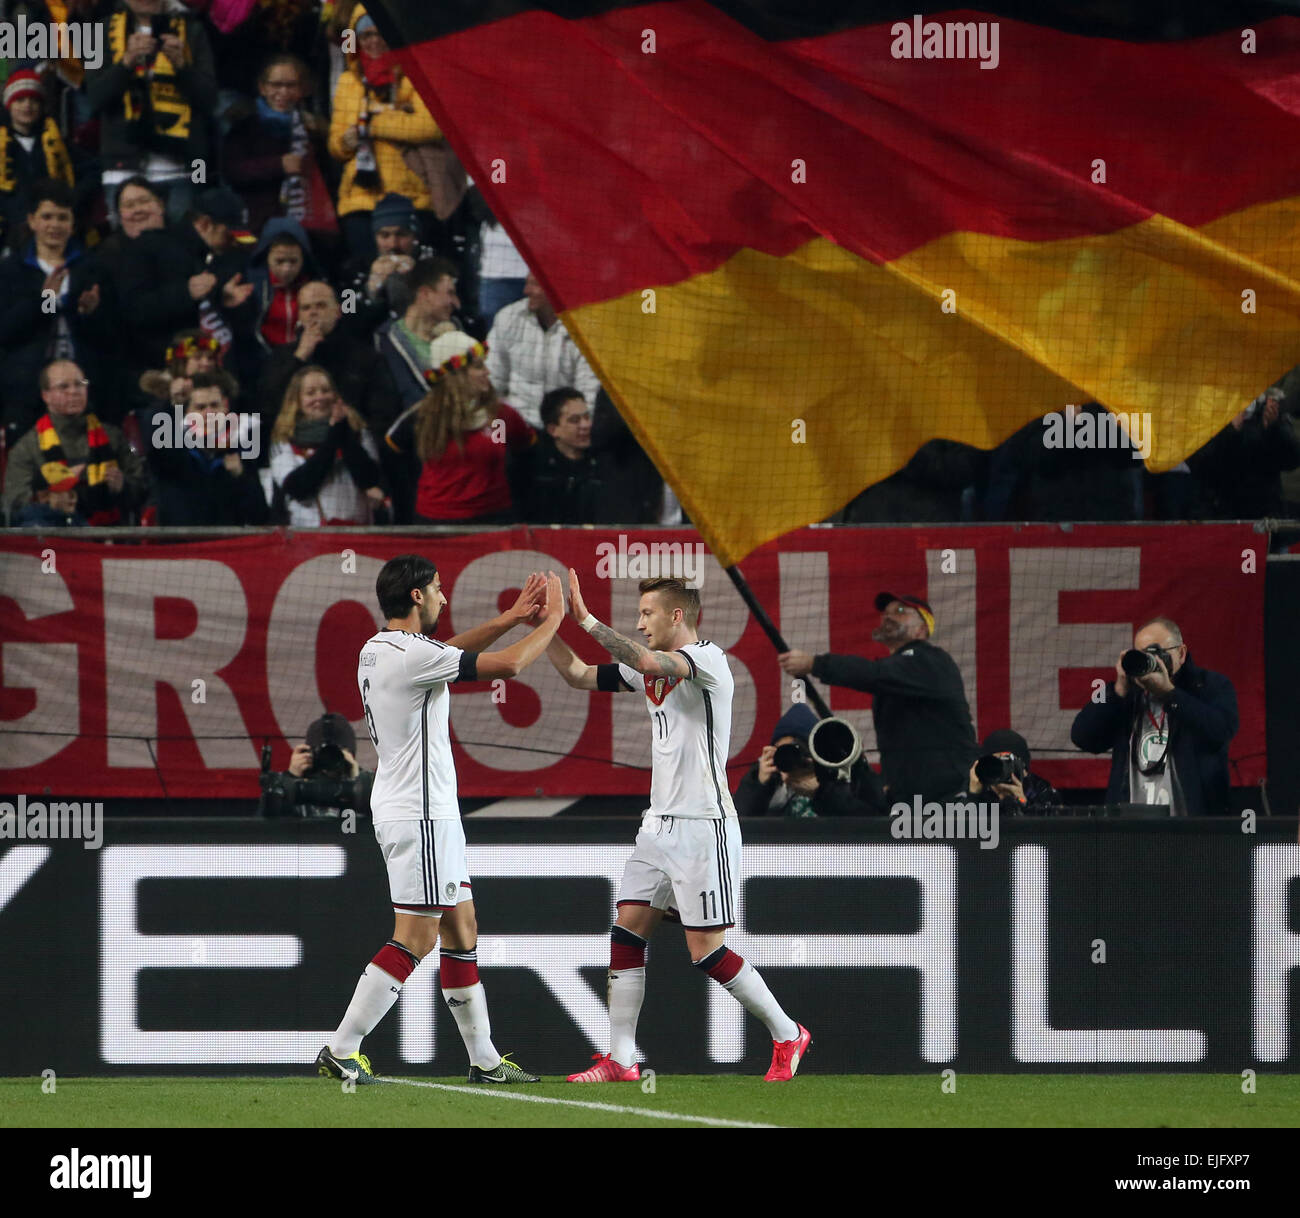 Kaiserslautern, Germany. 25th Mar, 2015. Germany's Marco Reus (R) and Sami Khedira cheer after scoring the 1-0 goal during the international friendly Germany vs Australia in Kaiserslautern, Germany, 25 March 2015. Photo: Thomas Frey/dpa/Alamy Live News Stock Photo